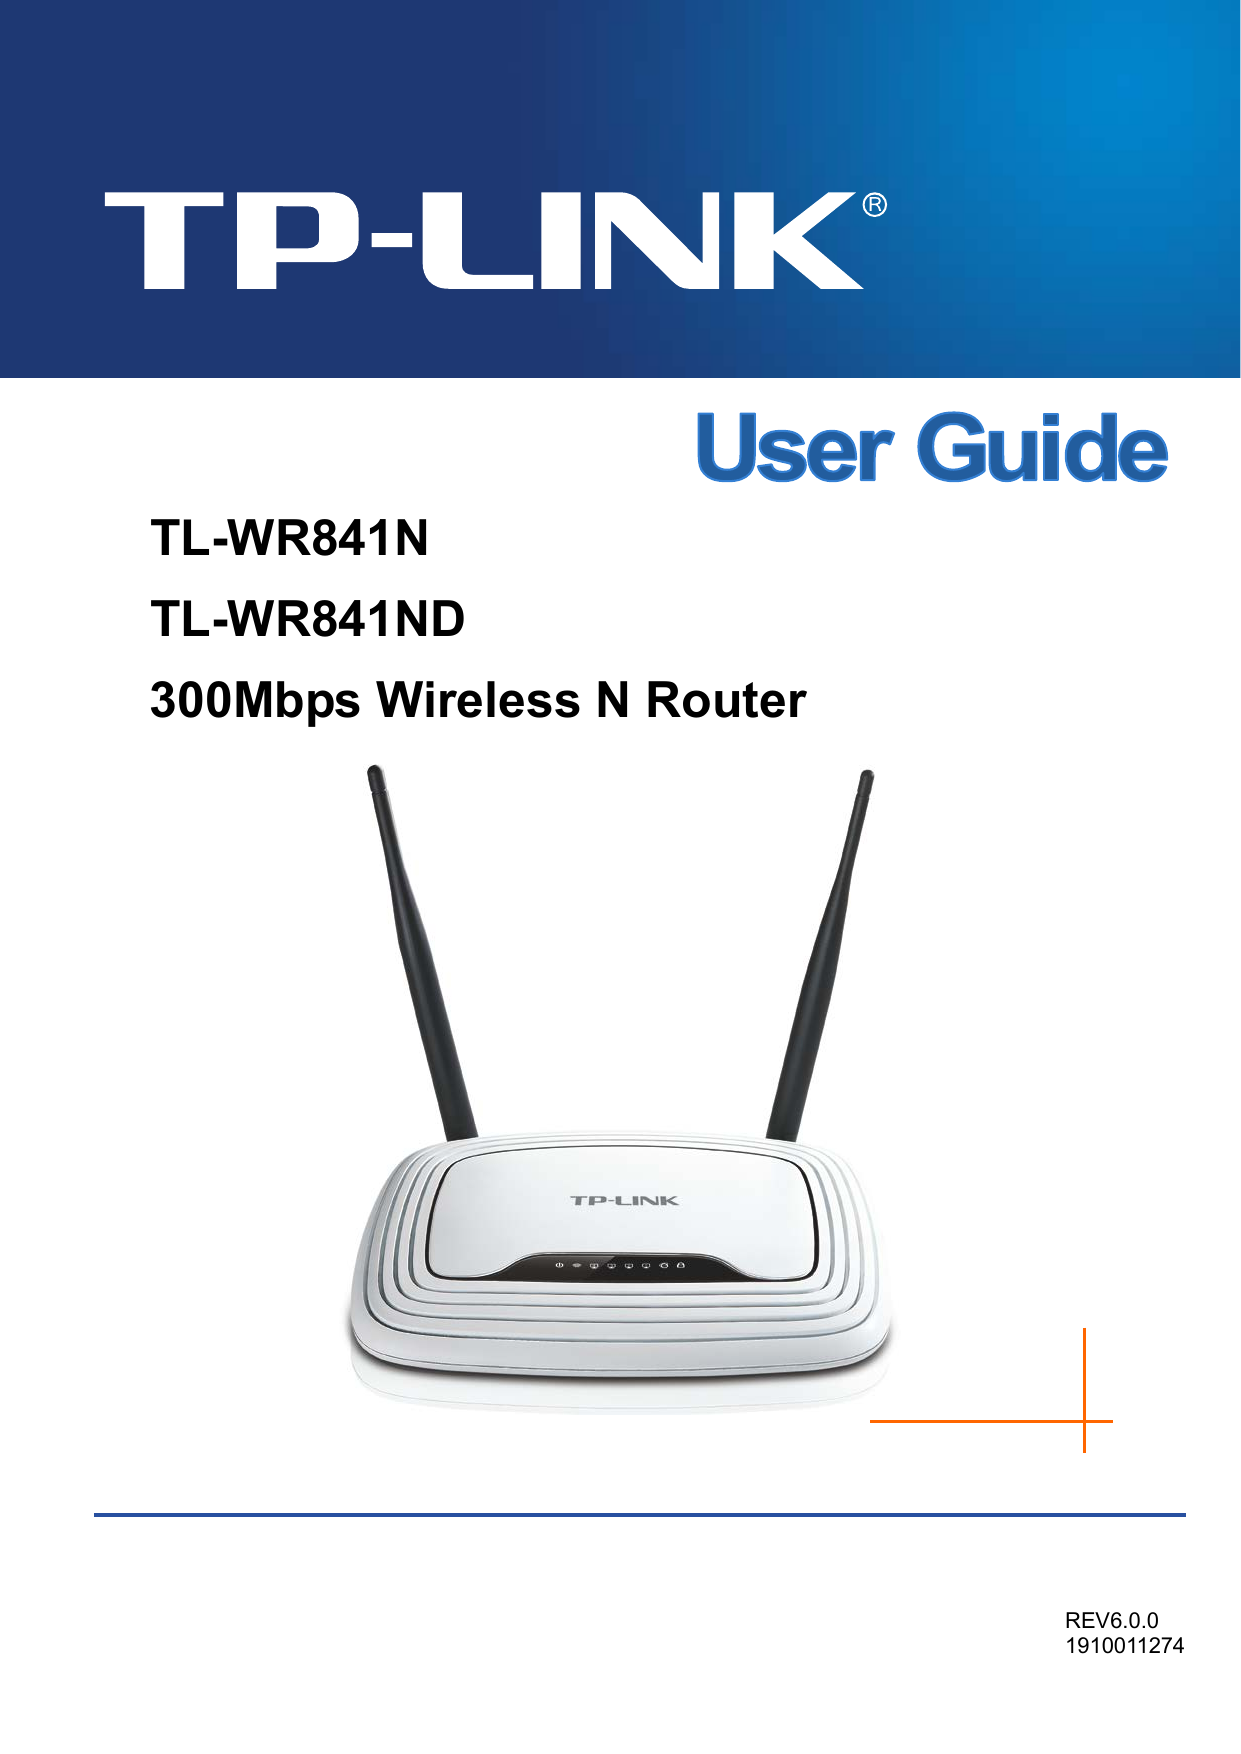   TL-WR841N TL-WR841ND 300Mbps Wireless N Router   REV6.0.0 1910011274     